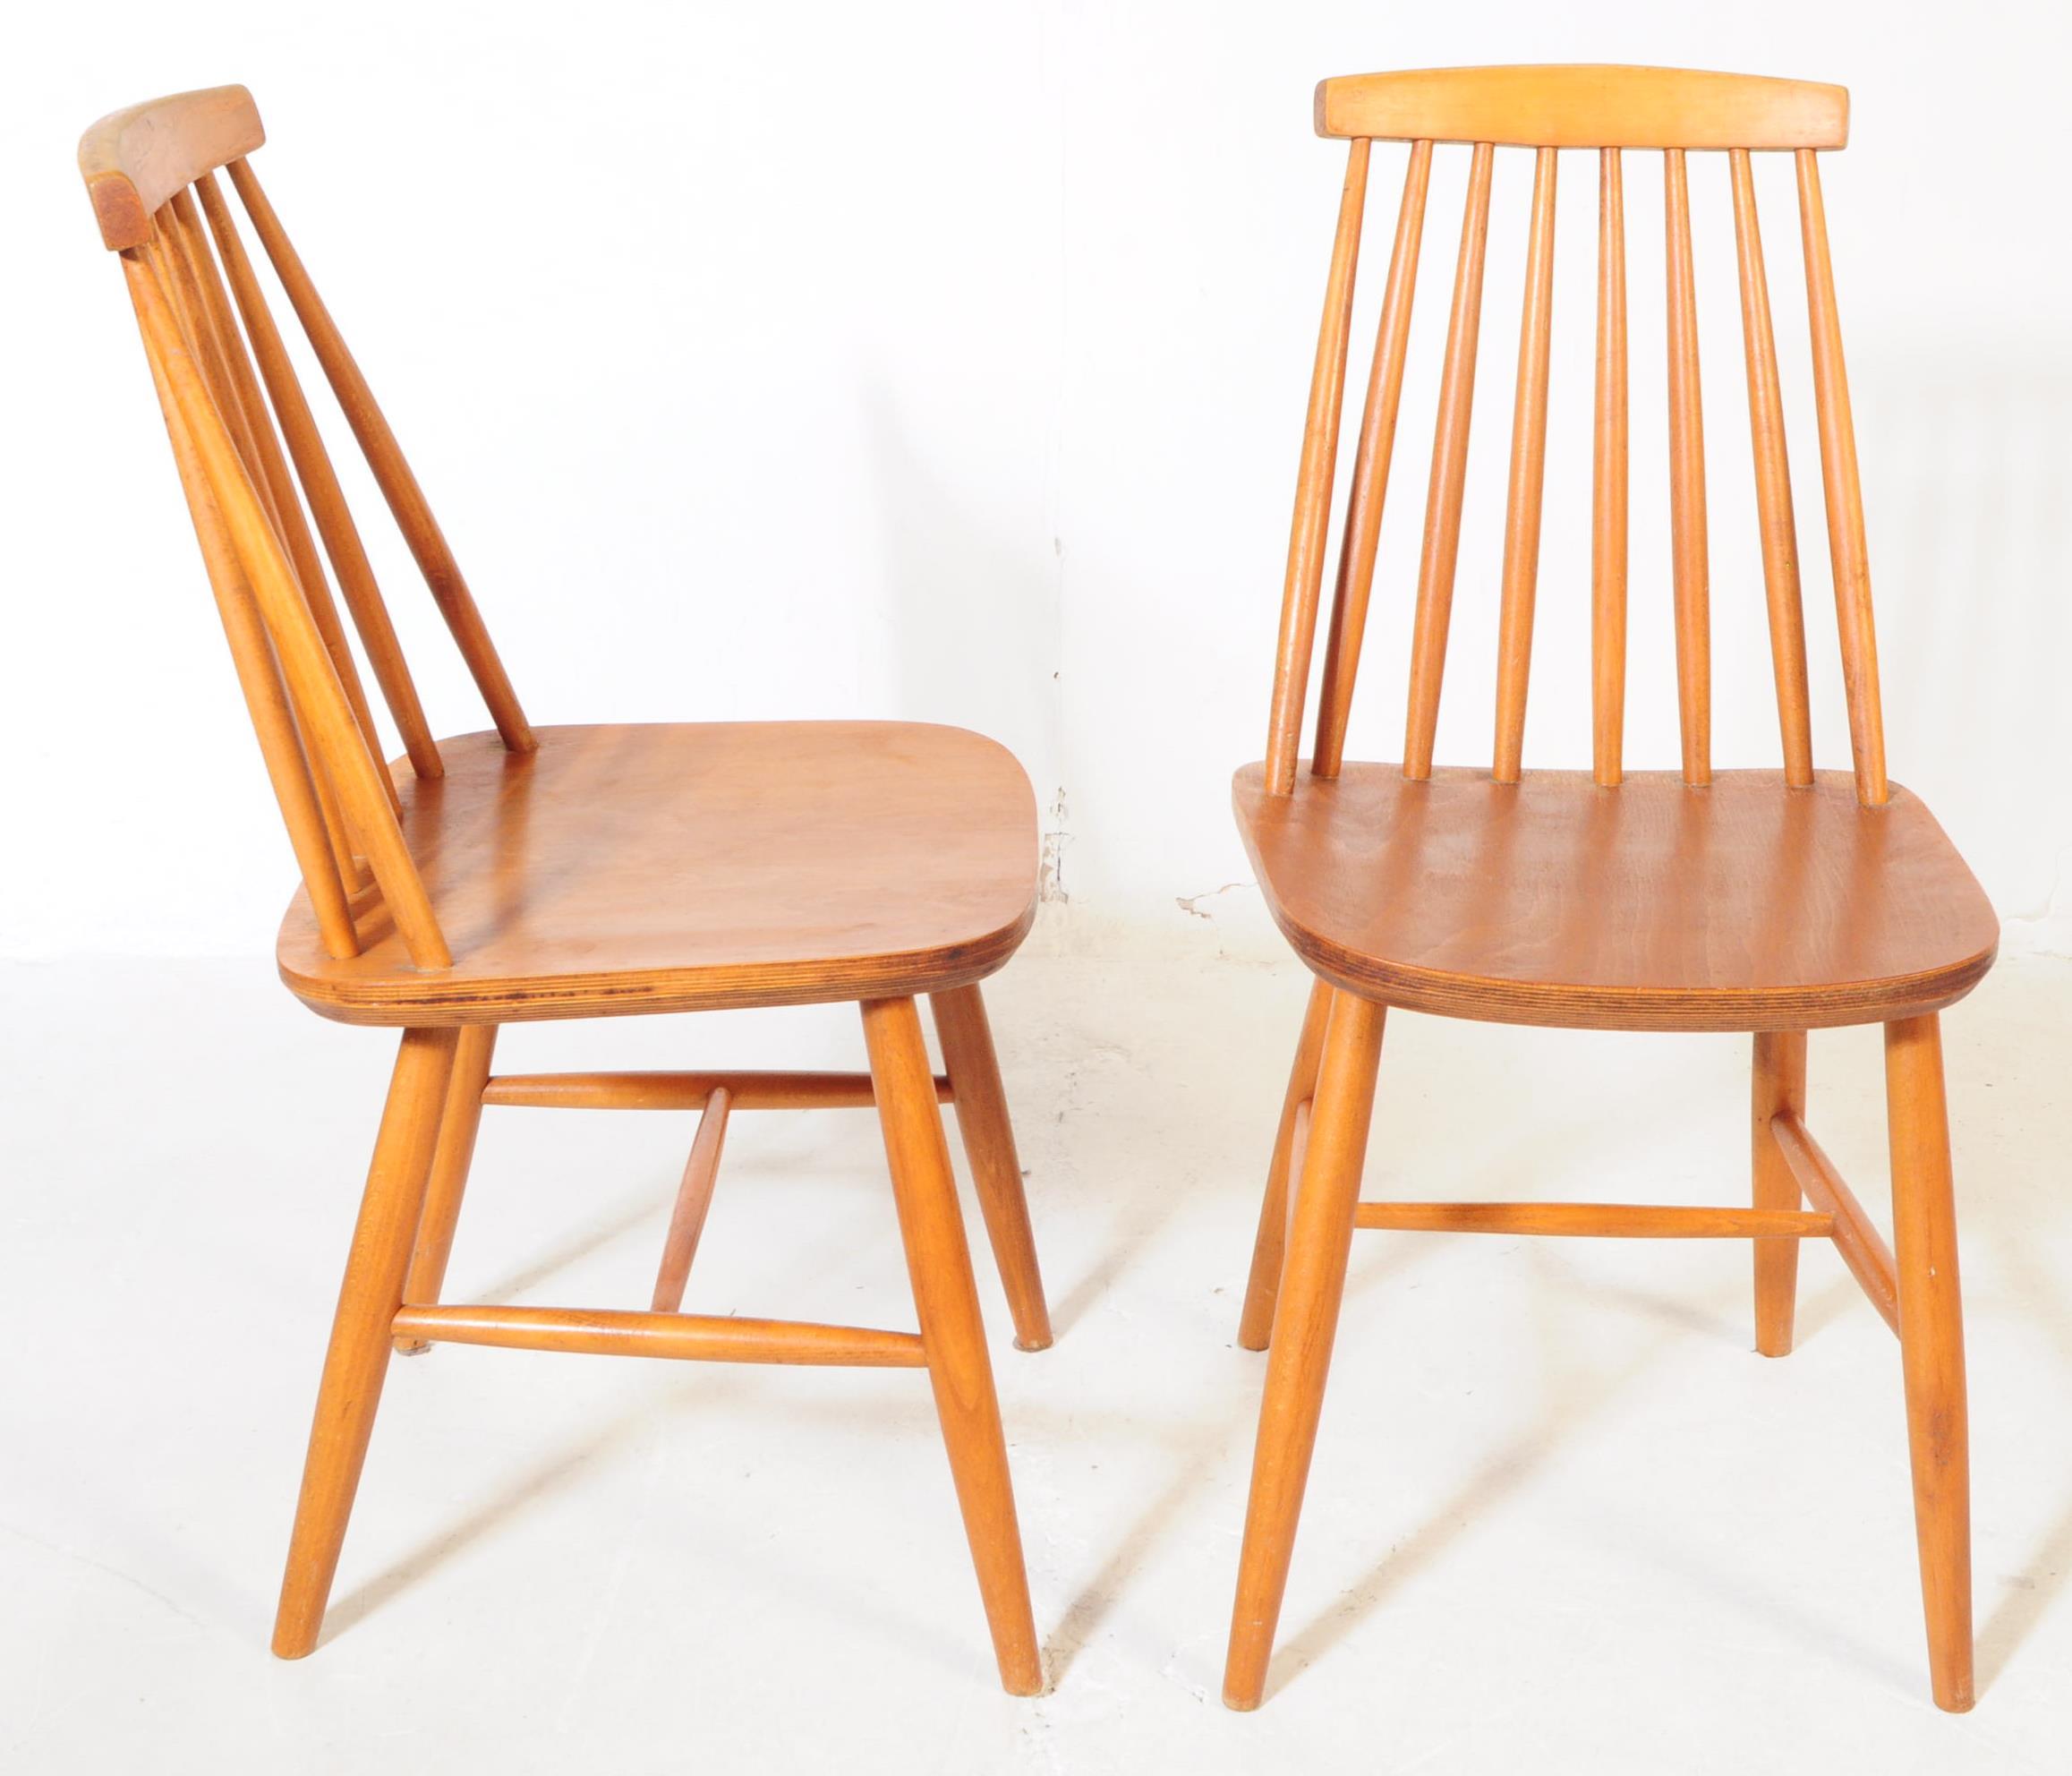 FOUR MID CENTURY STICK BACK DINING CHAIRS - Image 2 of 3